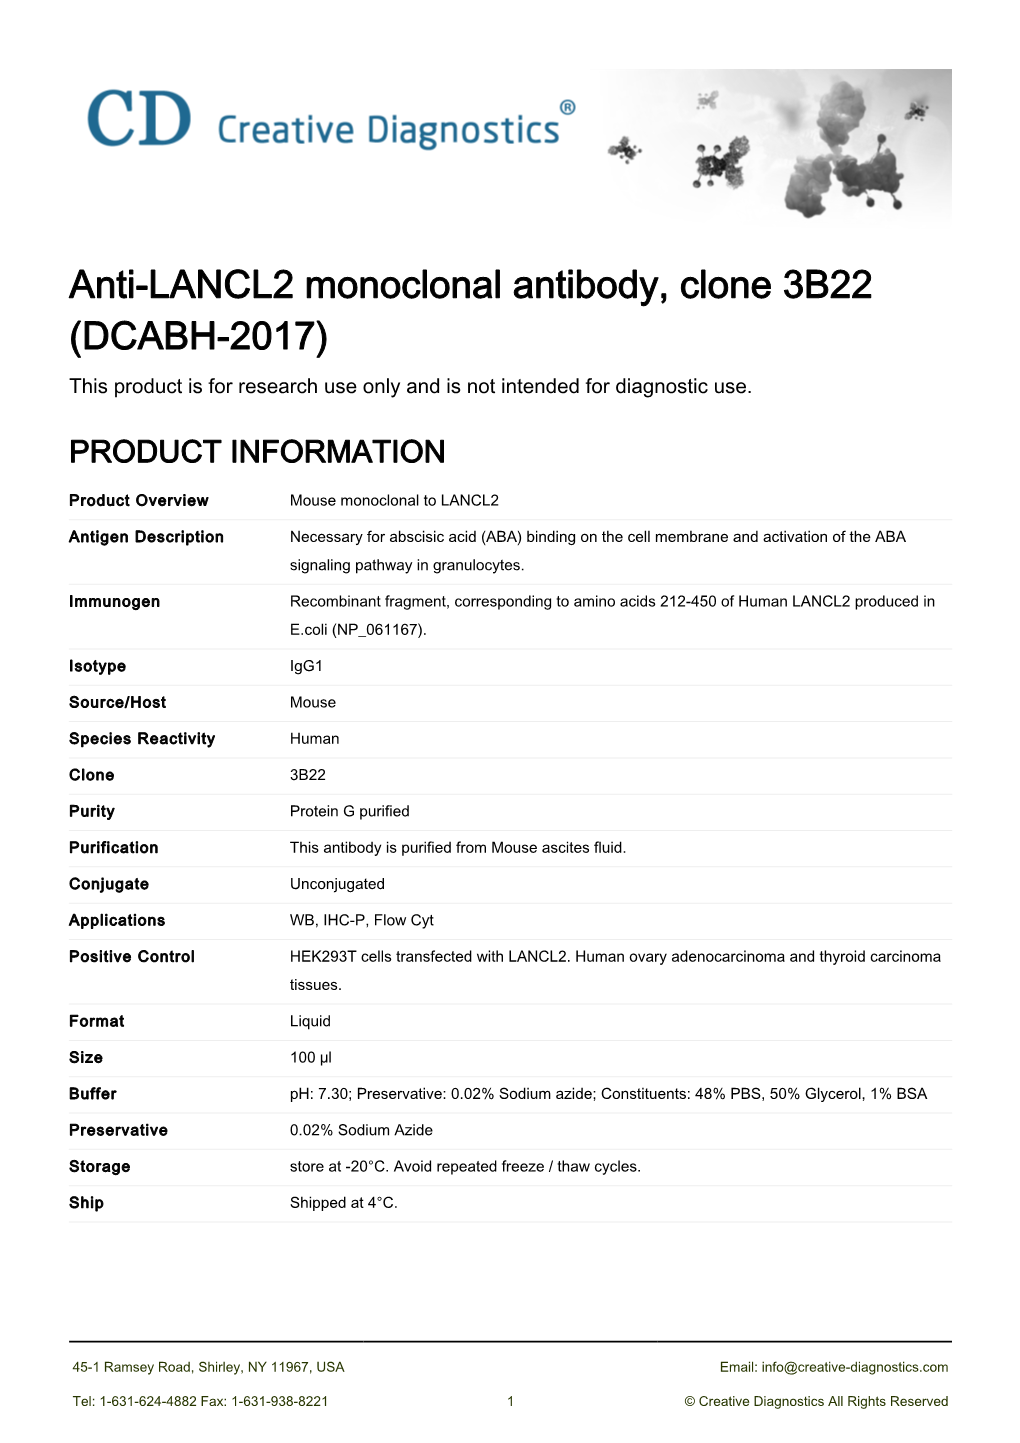 Anti-LANCL2 Monoclonal Antibody, Clone 3B22 (DCABH-2017) This Product Is for Research Use Only and Is Not Intended for Diagnostic Use